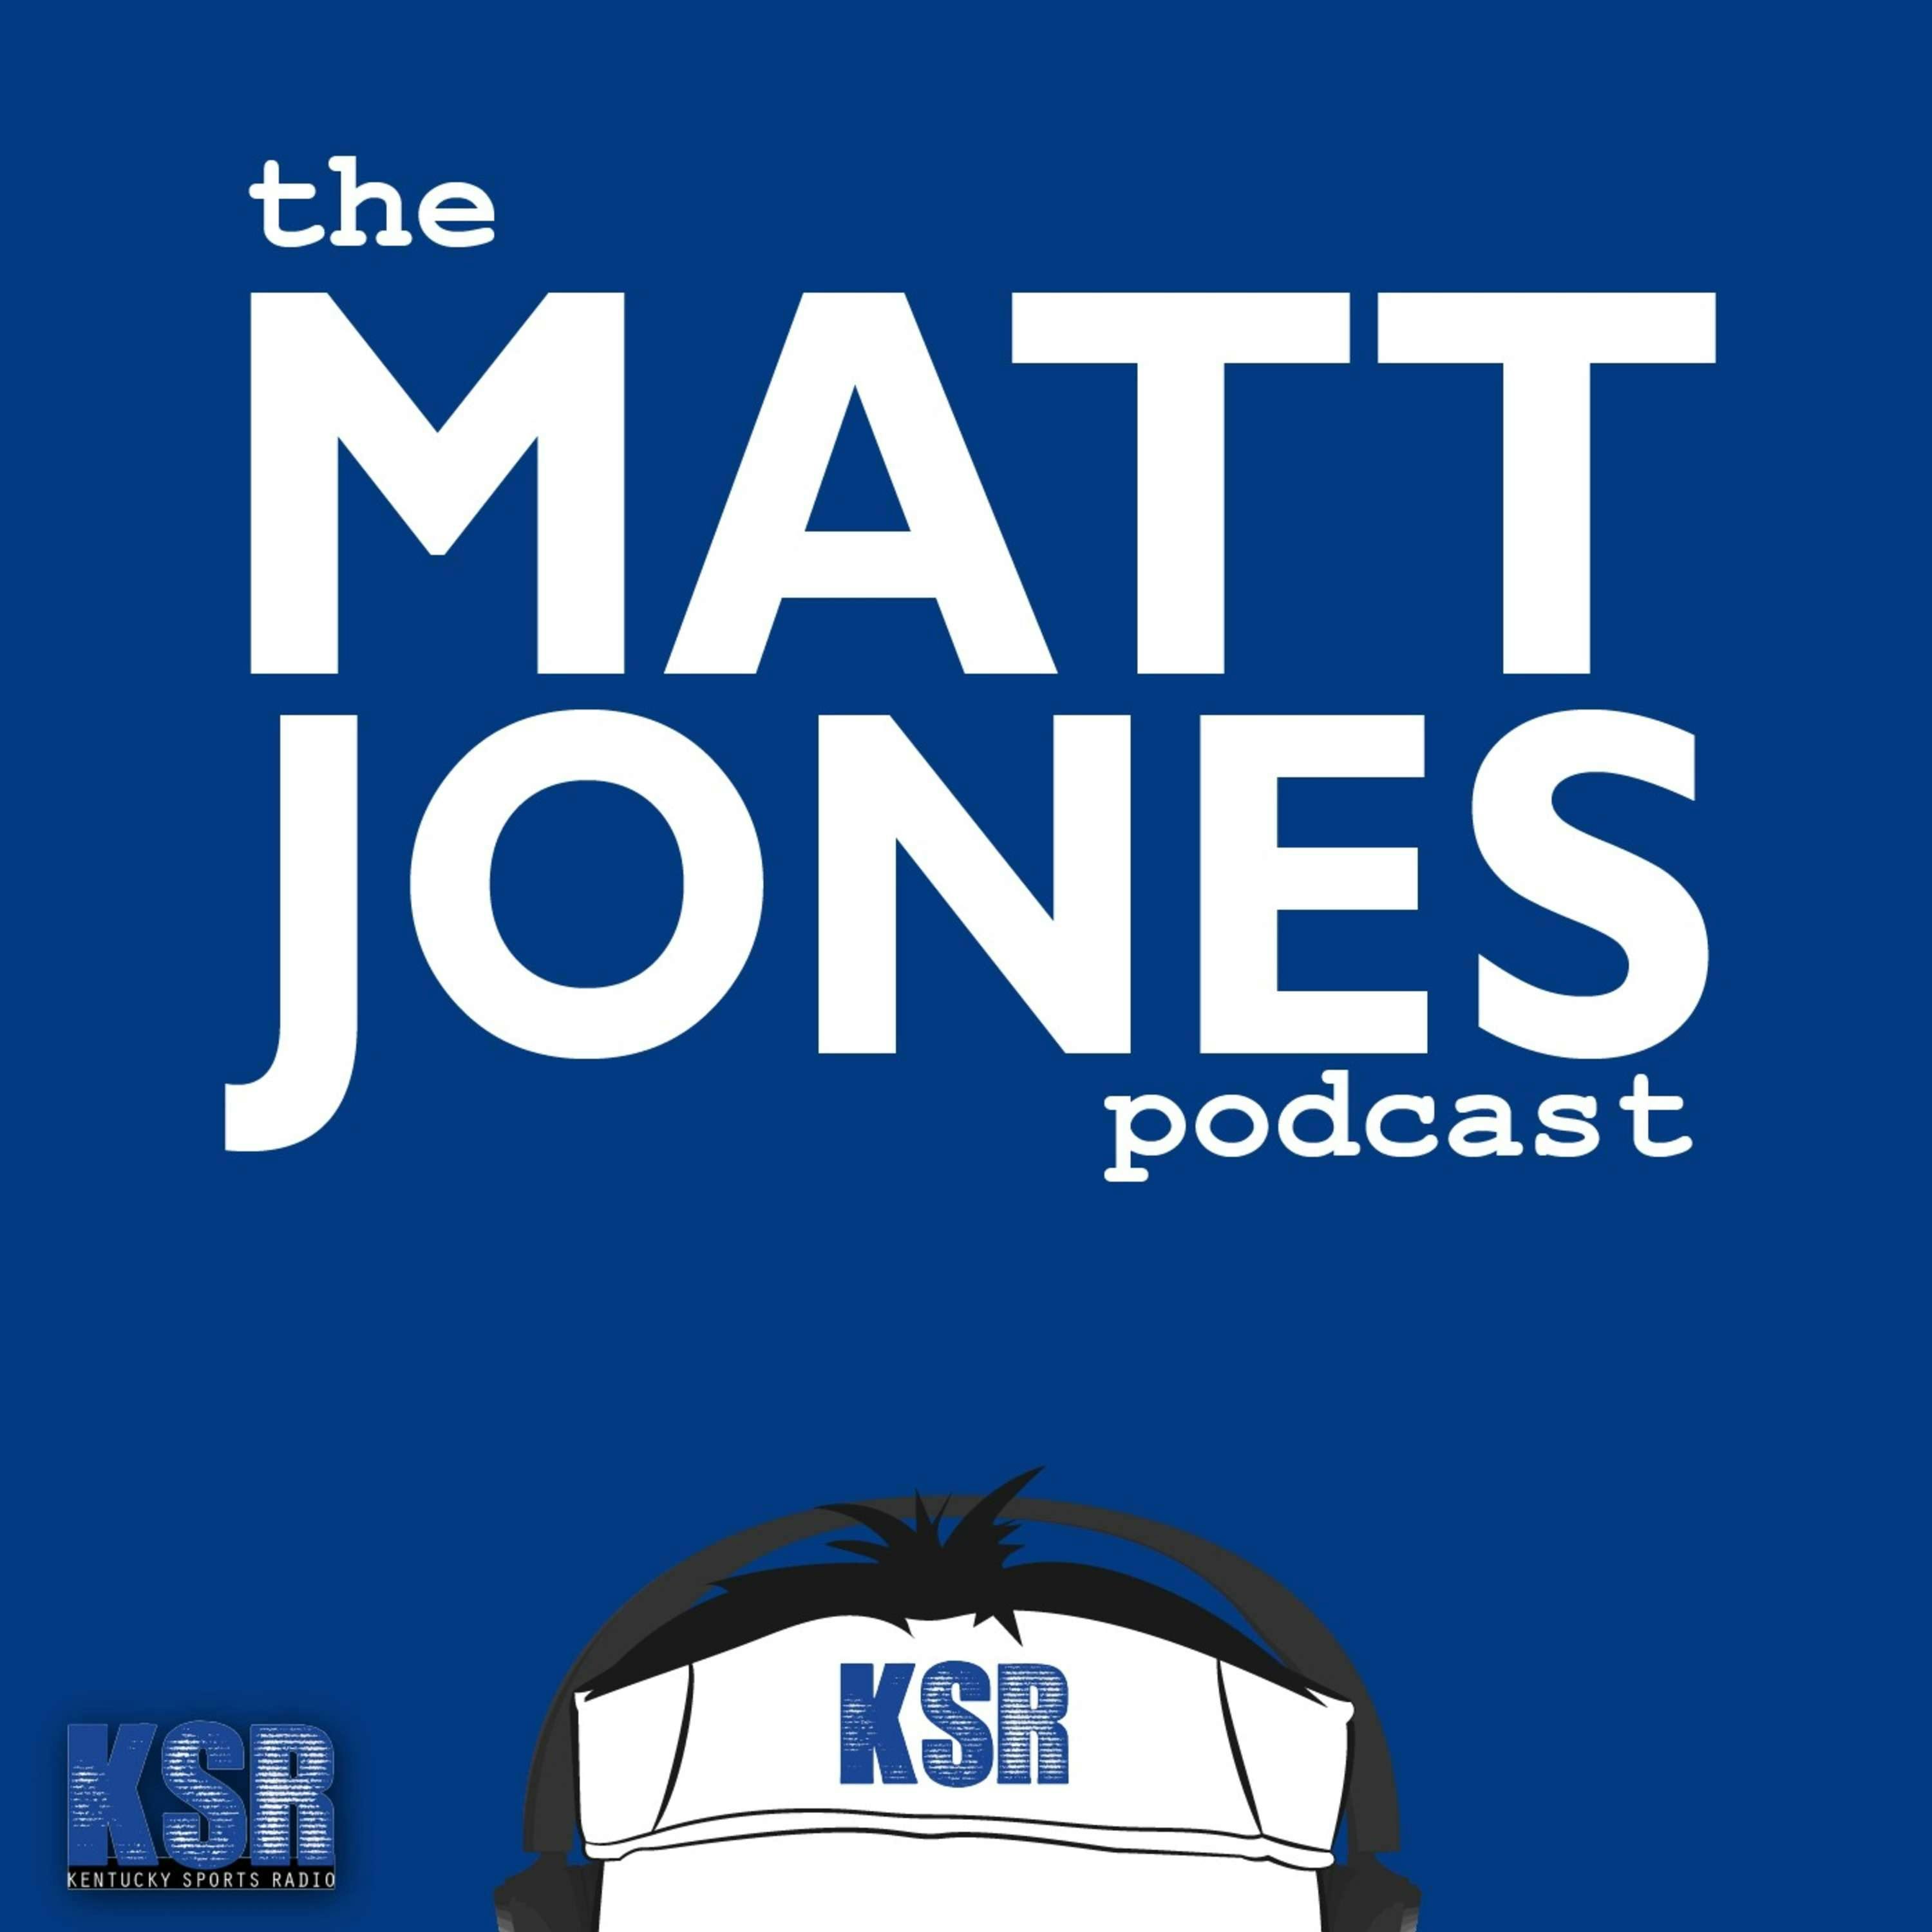 The Matt Jones Podcast E62: Stories from Behind the Scenes with Ryan and Drew